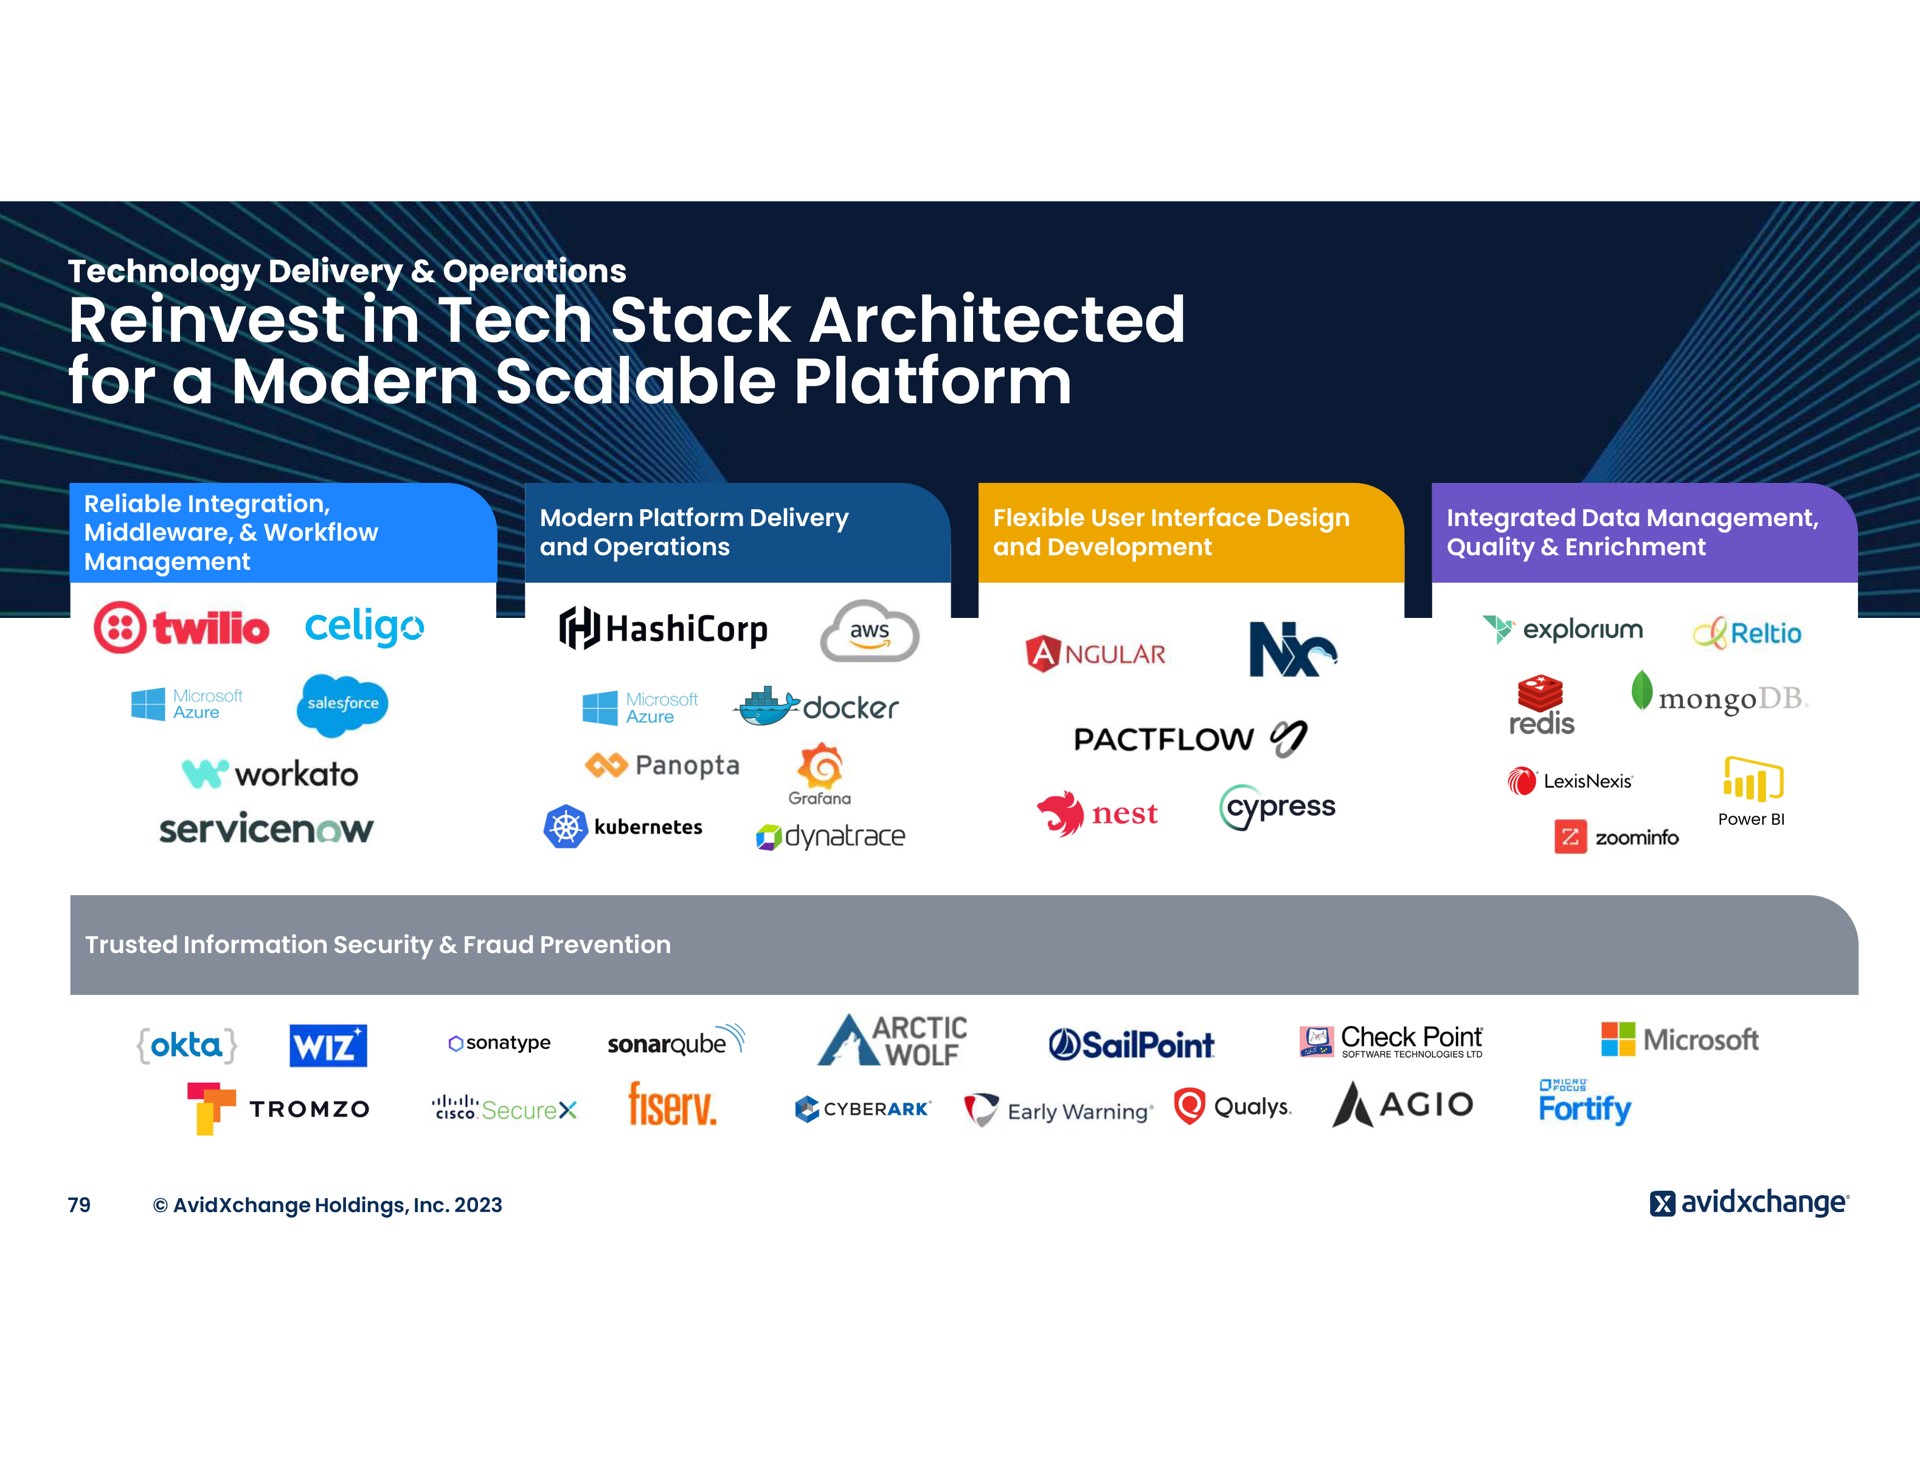 reinvest in tech stack for a modern scalable platform pal check point | AvidXchange